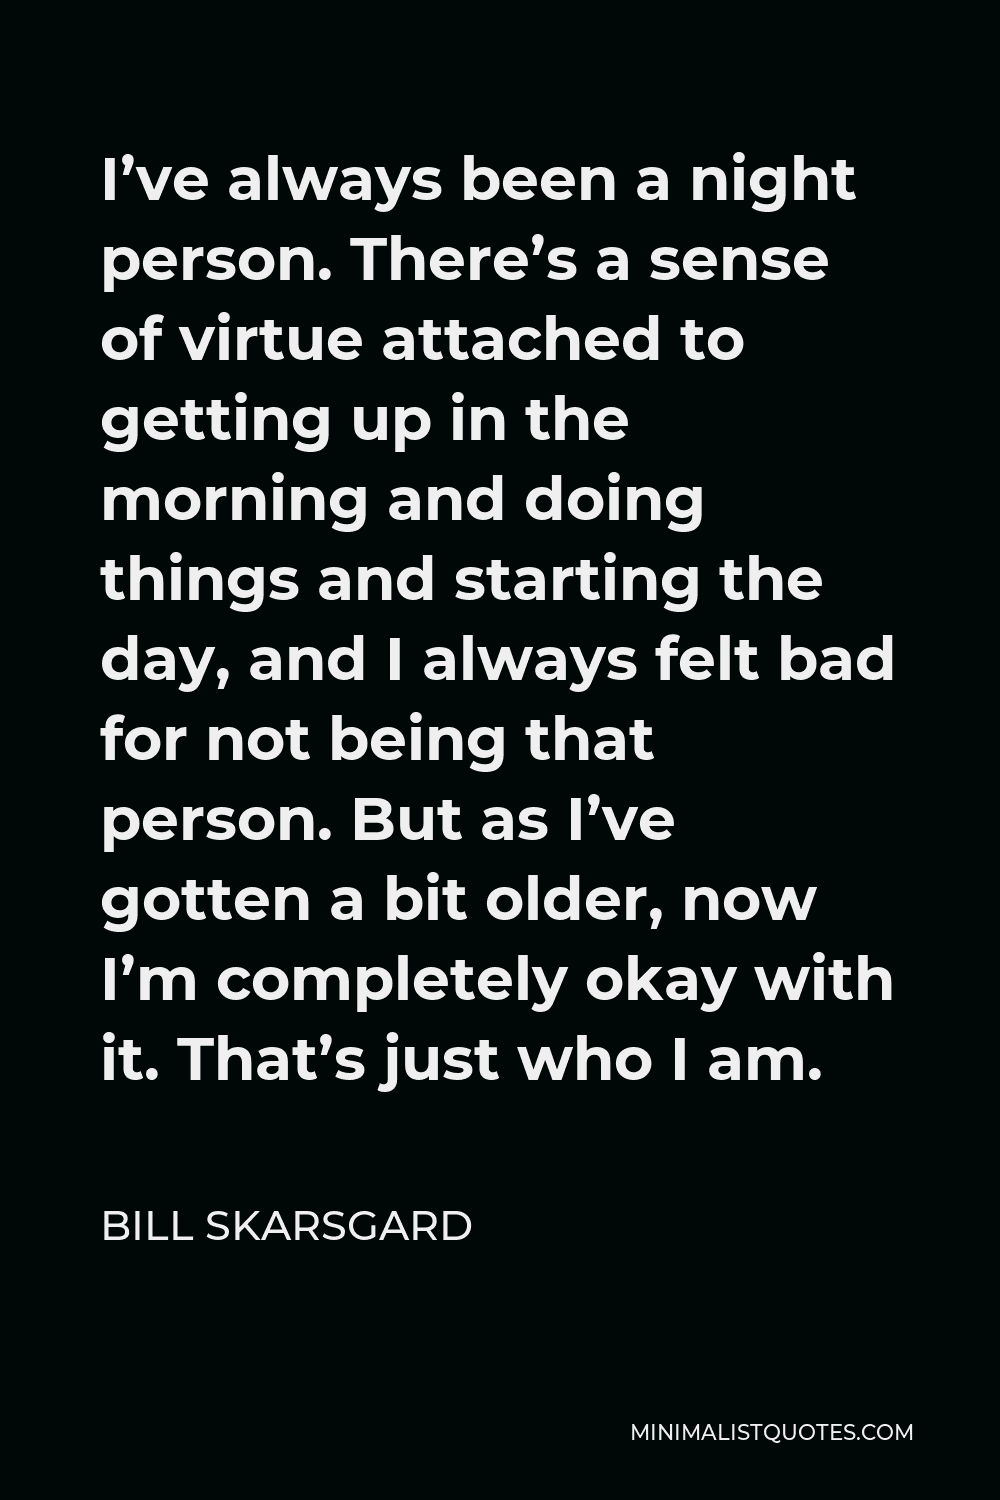 Bill Skarsgard Quote - I’ve always been a night person. There’s a sense of virtue attached to getting up in the morning and doing things and starting the day, and I always felt bad for not being that person. But as I’ve gotten a bit older, now I’m completely okay with it. That’s just who I am.